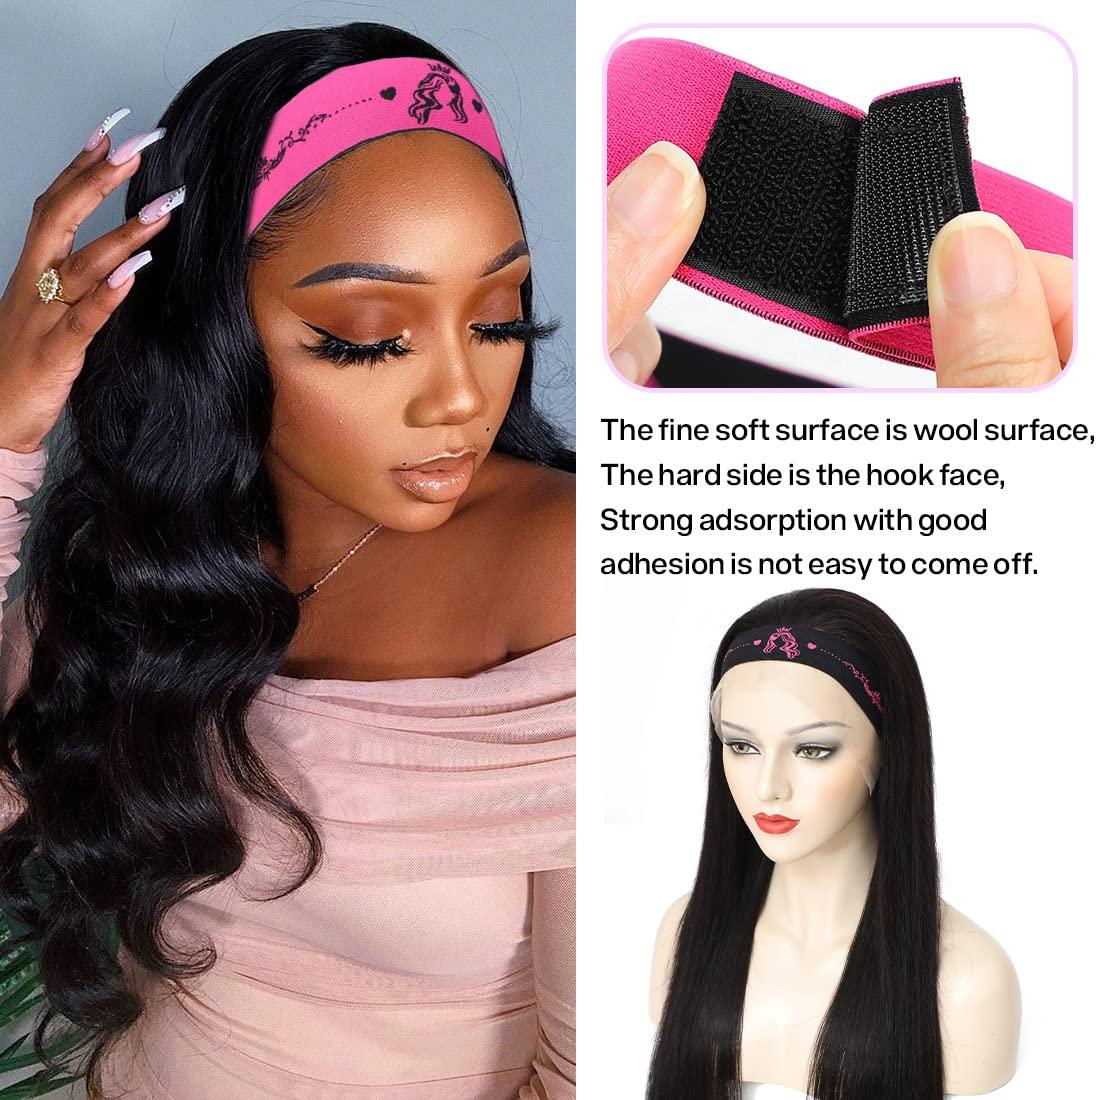 Shein 2 Pcs Wig Band for Melting Lace Band Elastic Bands for Wig Edge Lace Frontal Melt Adjustable Wrap to Lay Scarf Keeping Grip No Slip